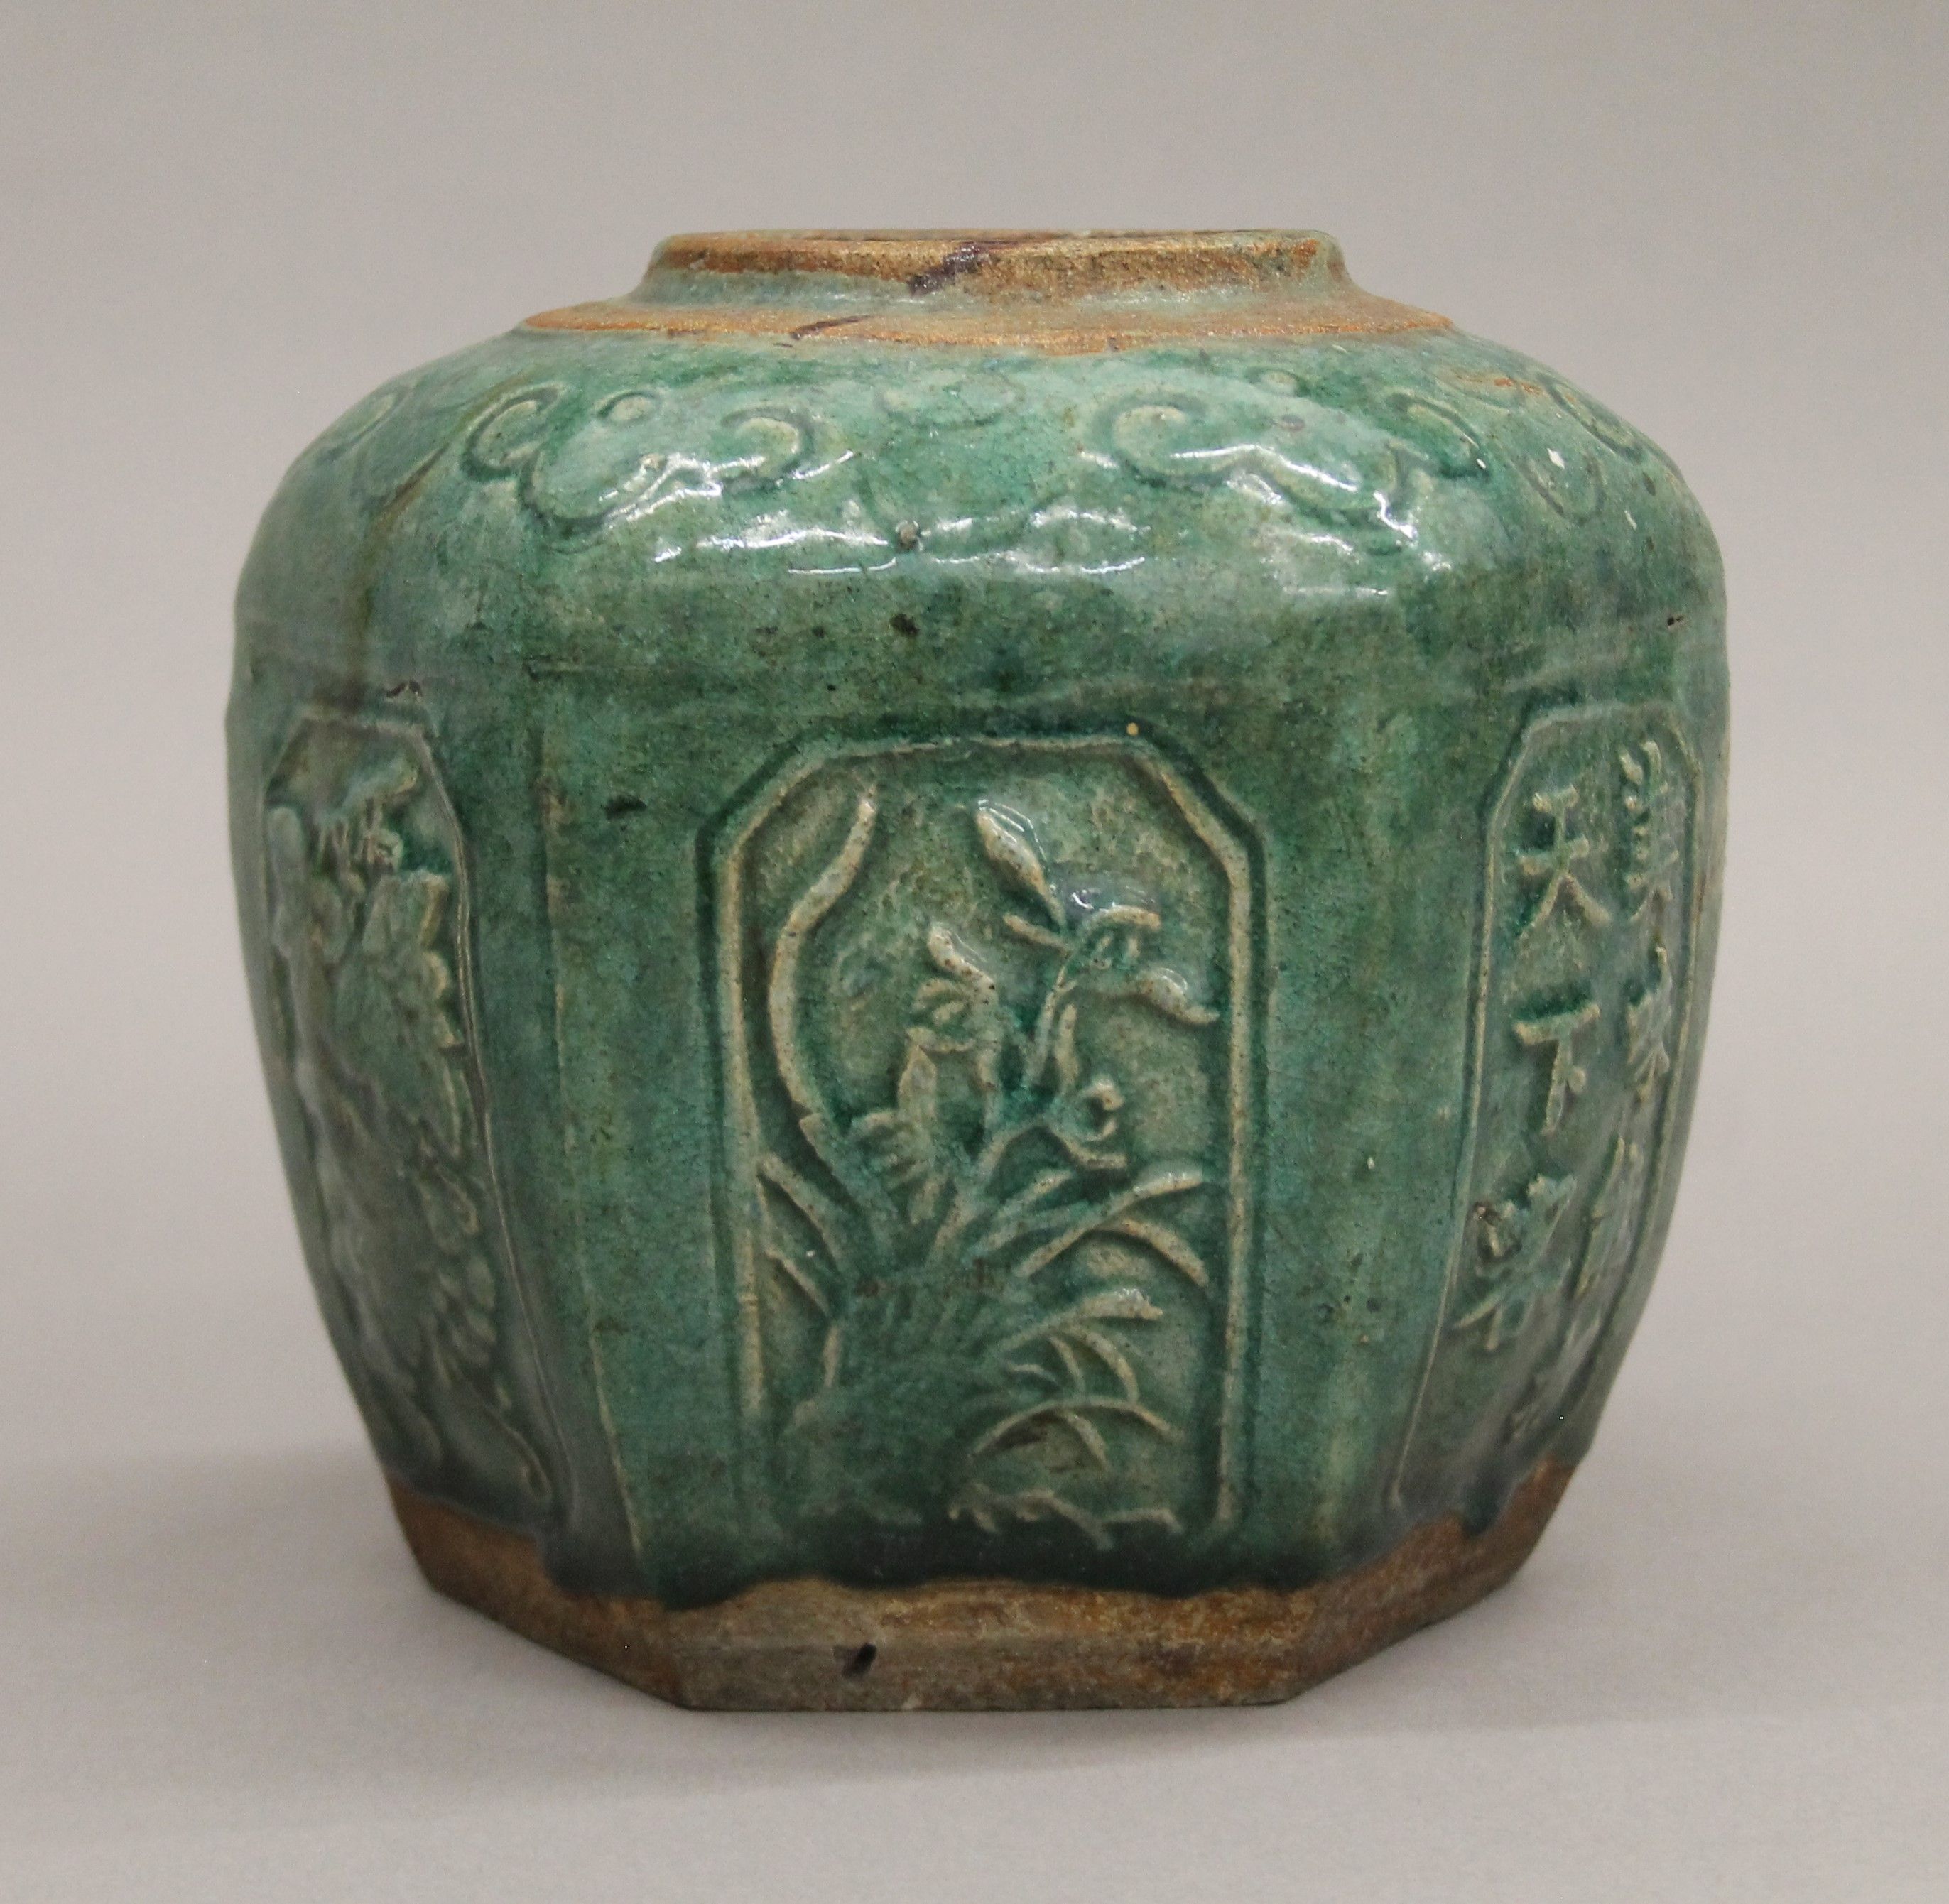 A Chinese green glazed jar, with panels of floral and calligraphy decoration. 14.5 cm high. - Image 2 of 5